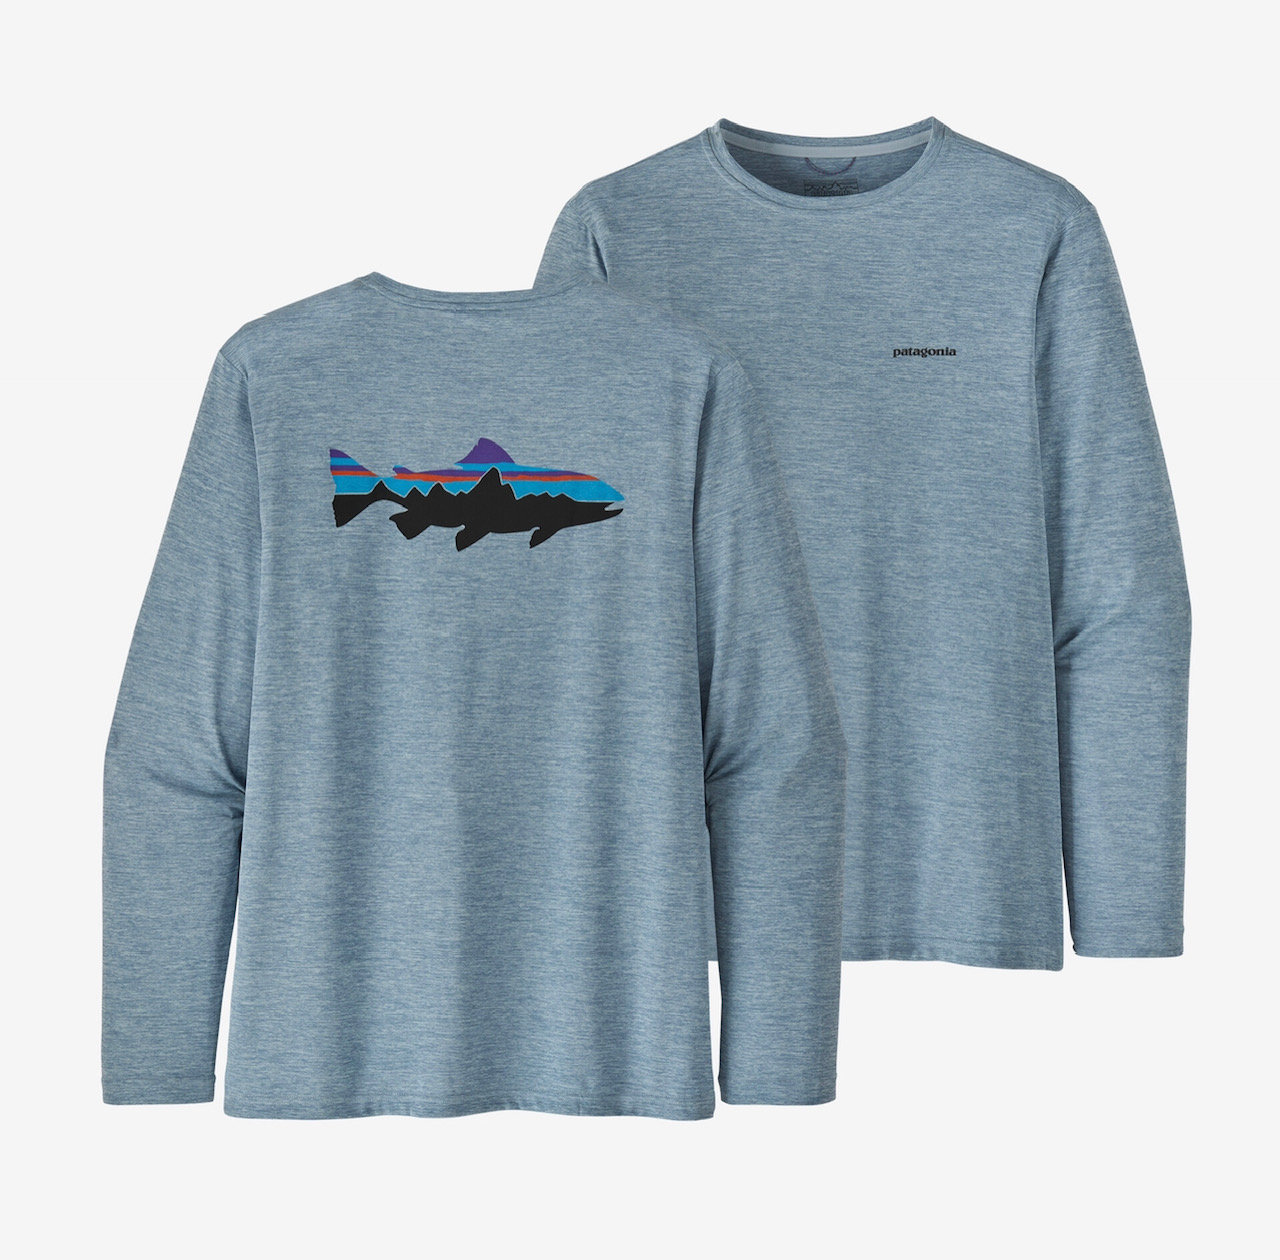 Patagonia M's L/S Capilene Cool Daily Fish Graphic Shirt - Fitz Roy Trout: Steam Blue X-Dye - Medium